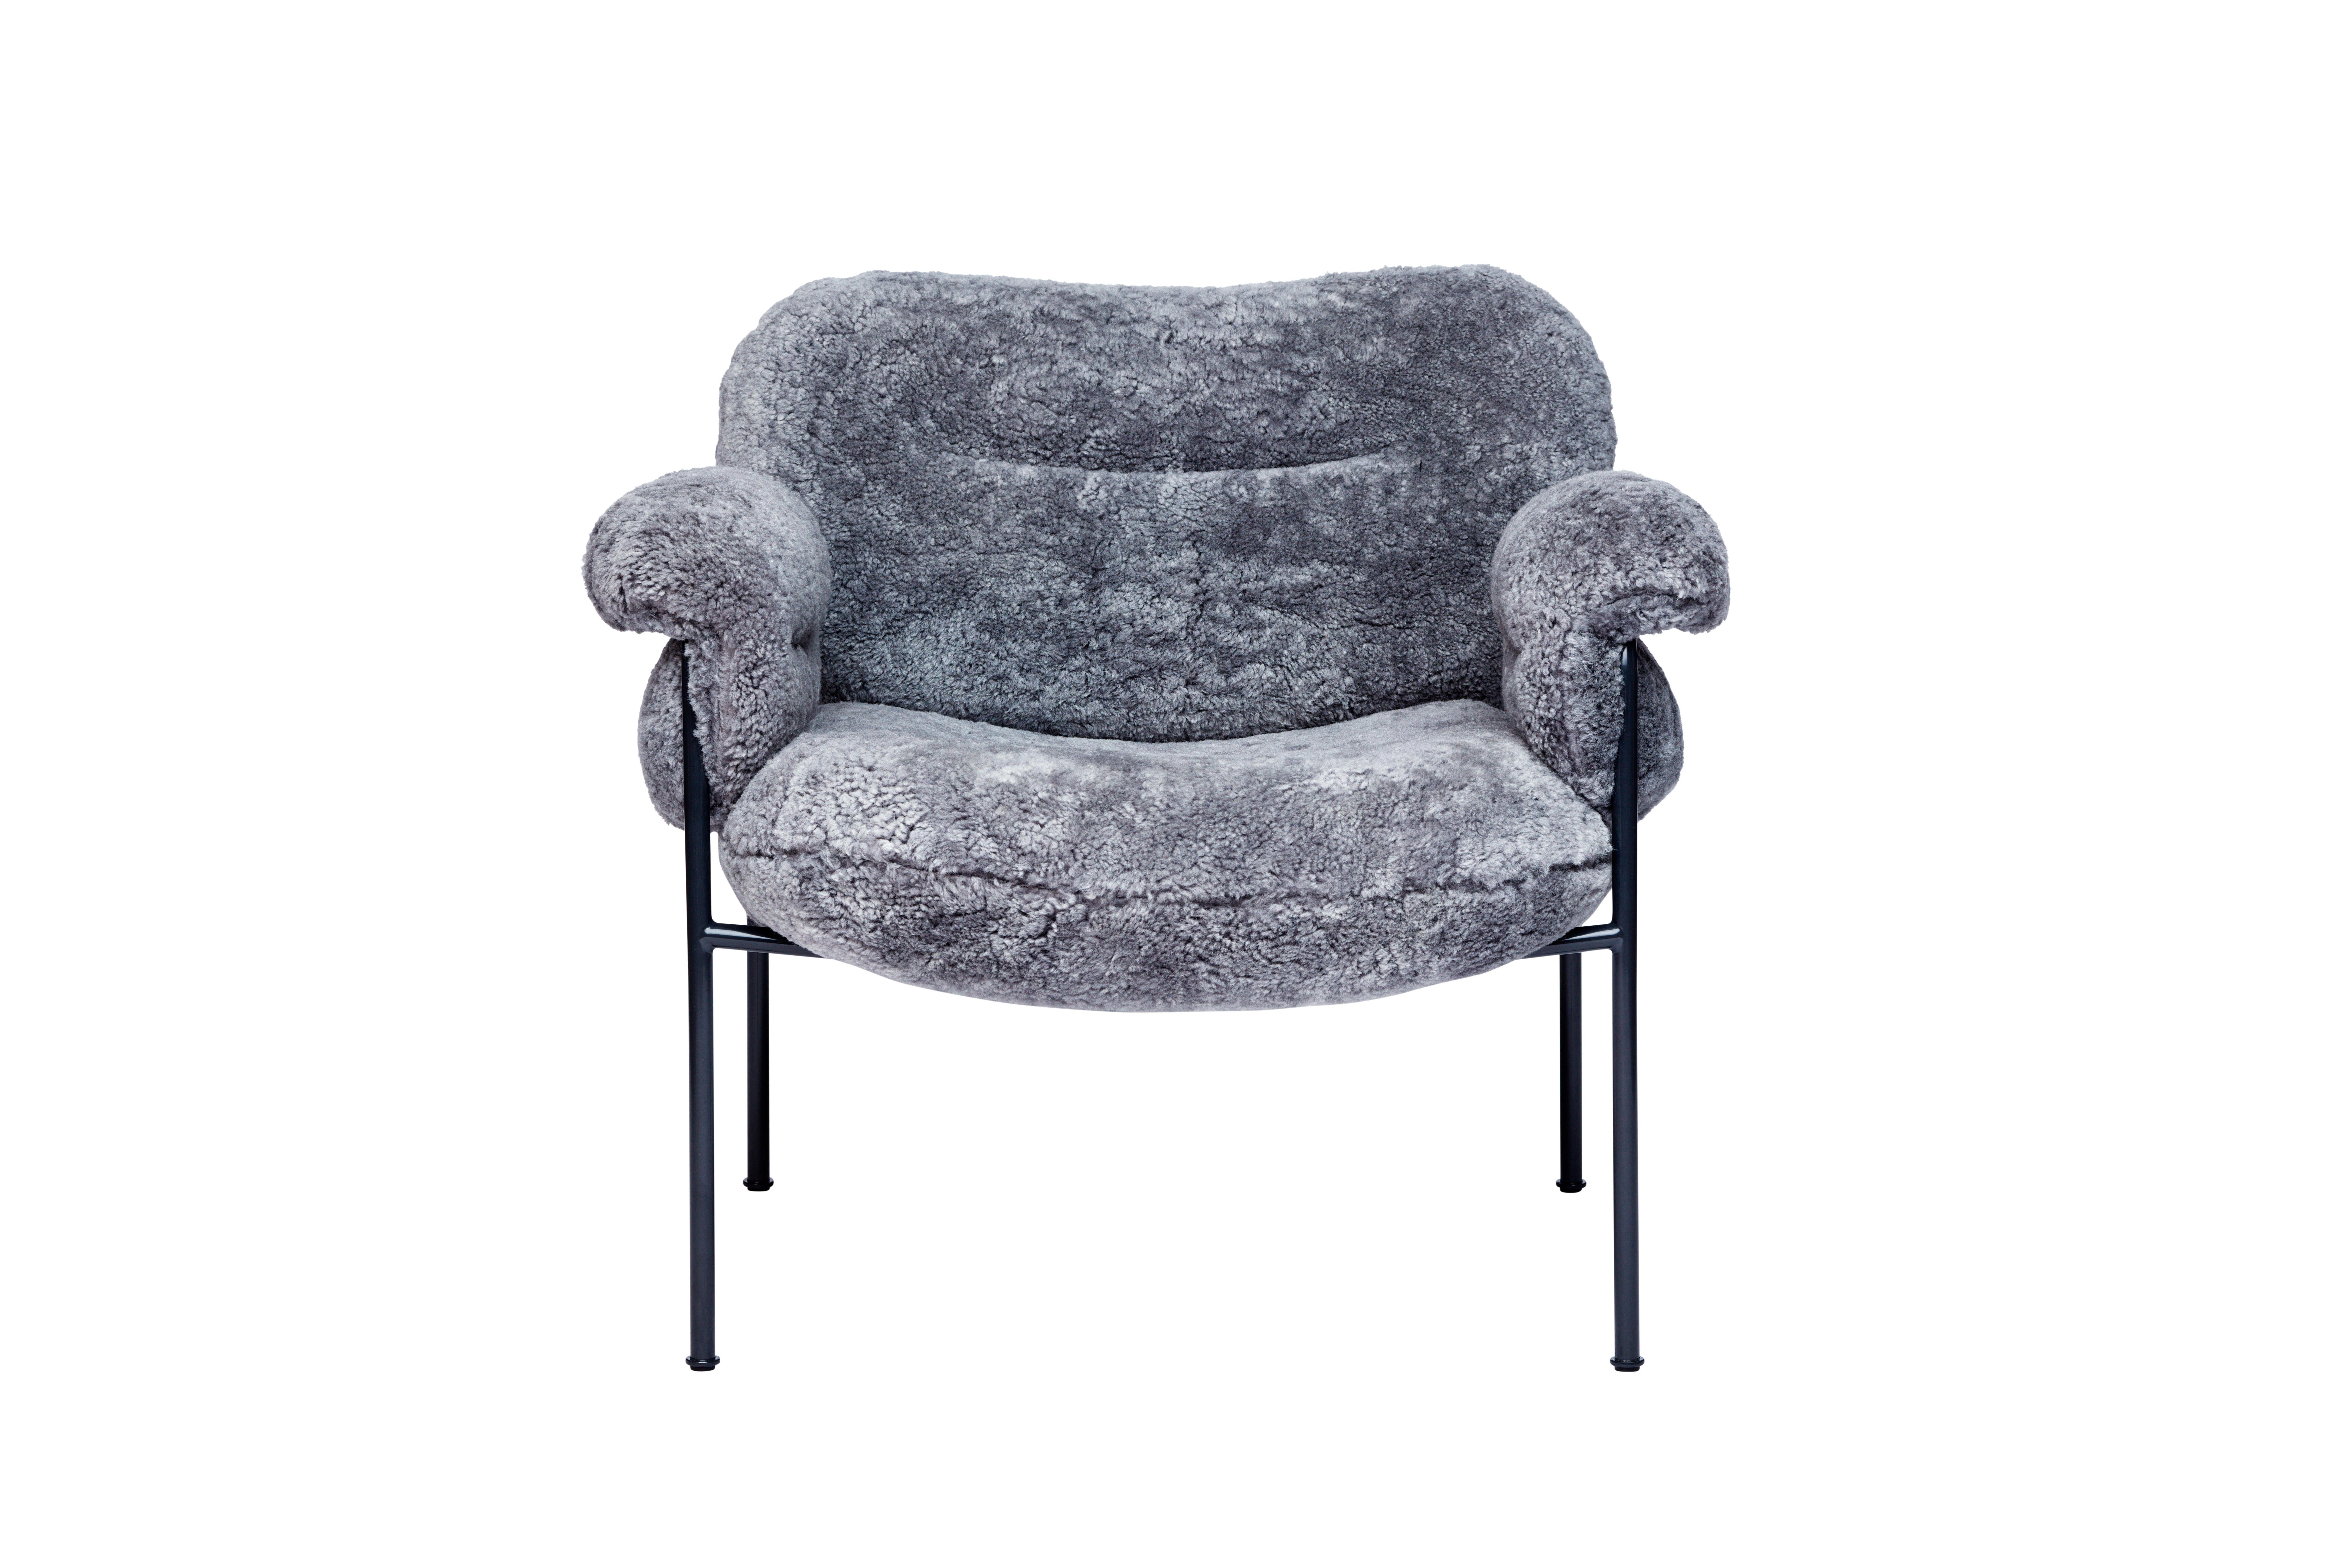 Bollo Armchair by Andreas Engesvik for FOGIA

Model shown on main images: White steel legs + Fabric: Sheepskin Grey - Mohawi

Width: 81cm /32in
Depth: 81cm /32in
Height: 71cm /28in
Seat Height: 42.5cm /17in
Seat Depth: 54cm / 21in

The iconic Bollo